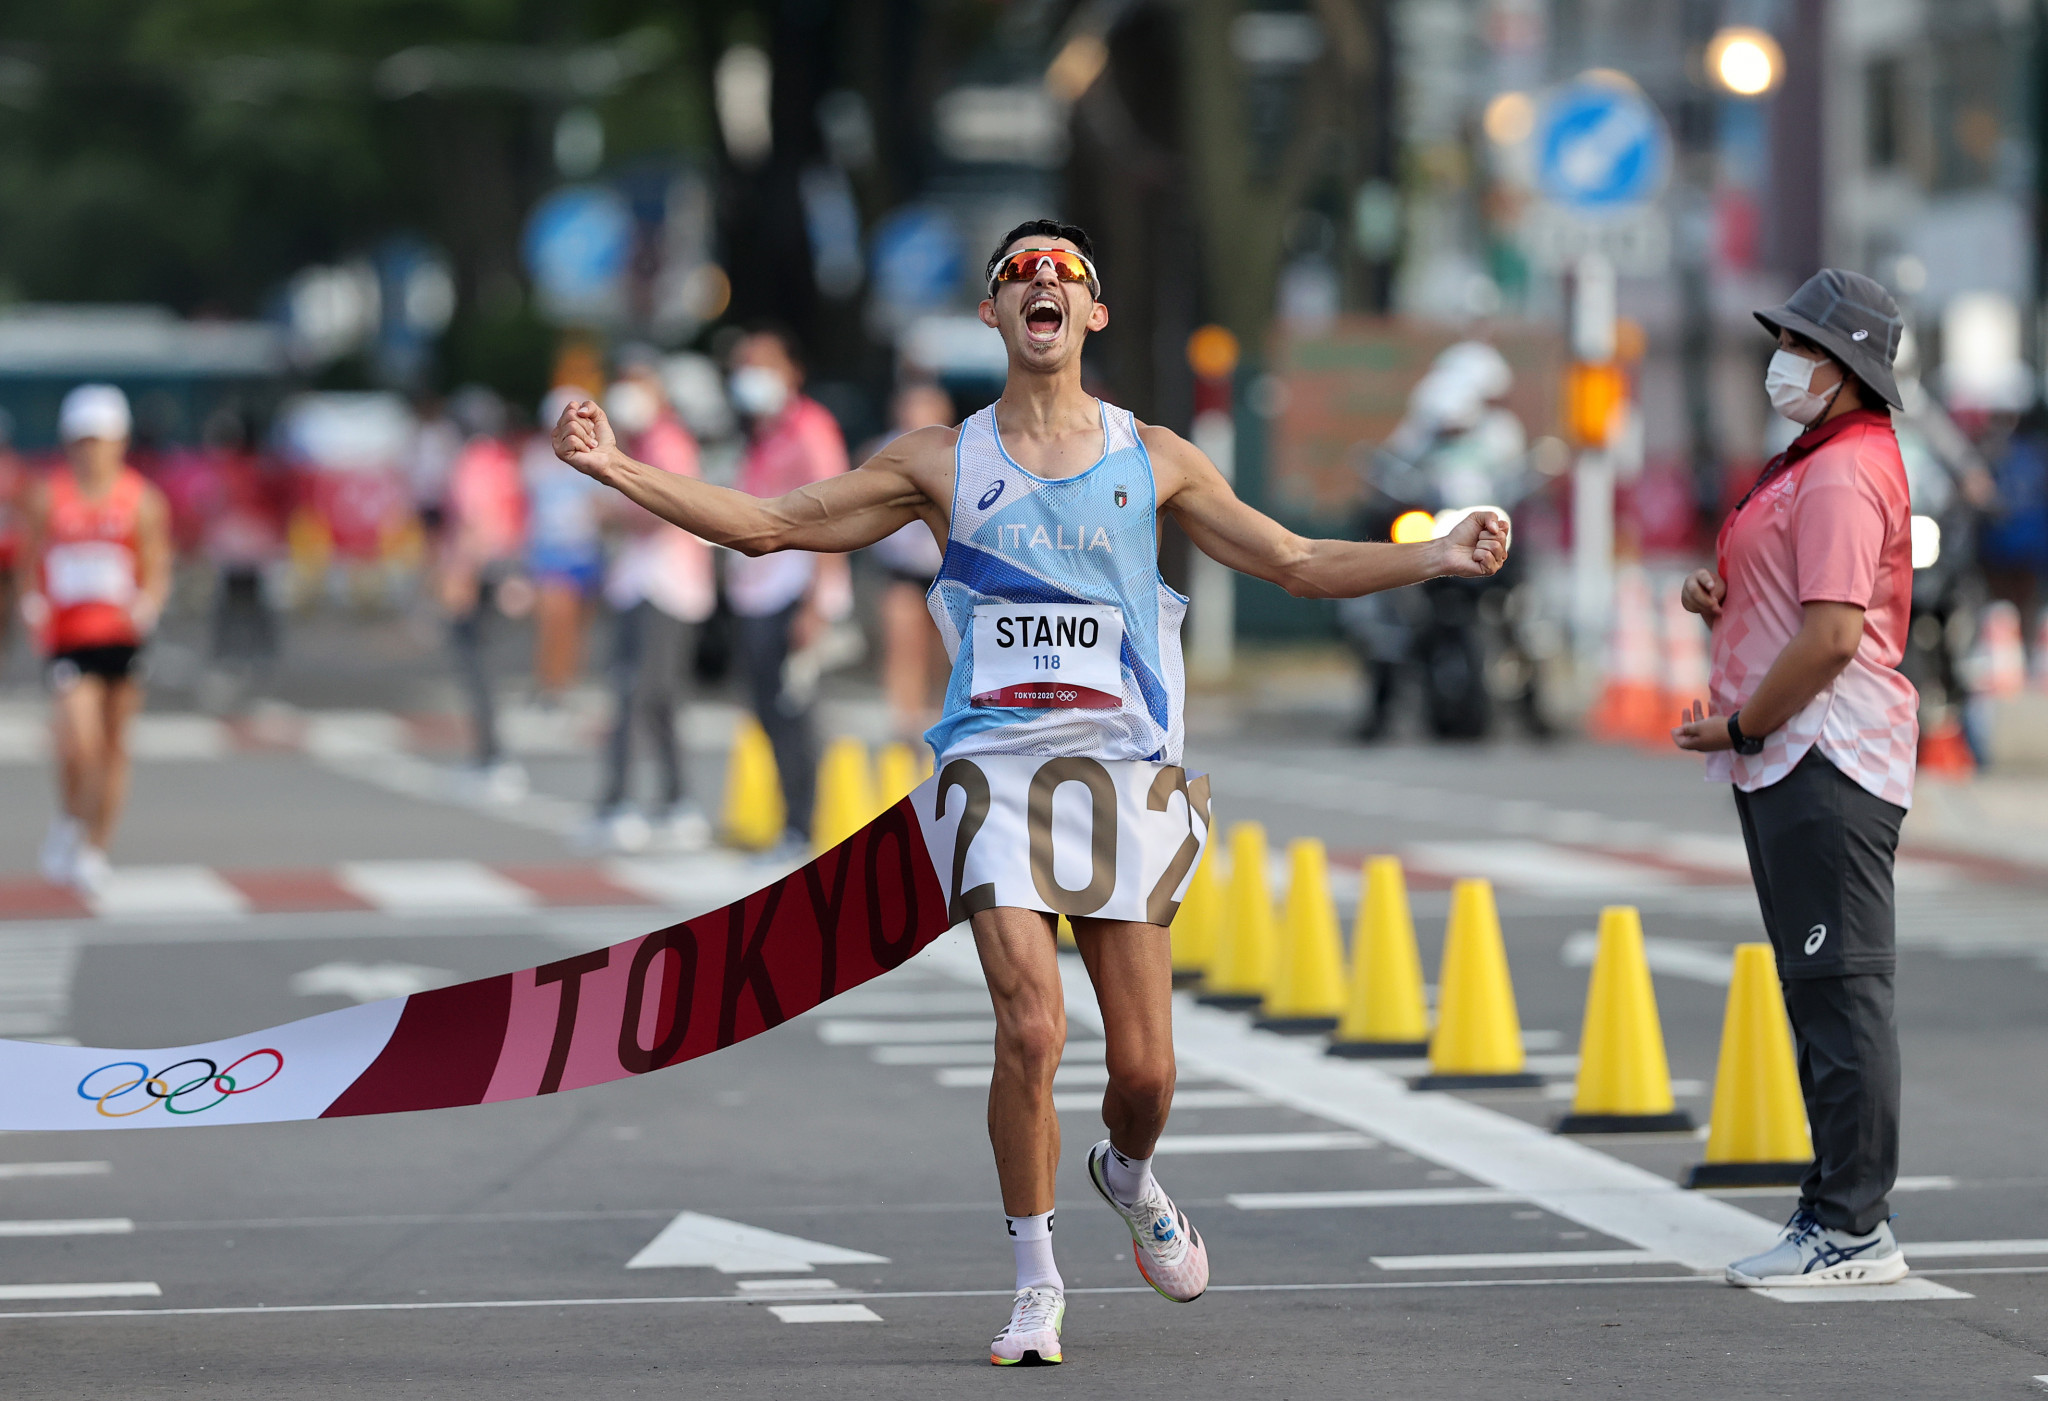 Massimo Stano of Italy won the men's 20 kilometres race walk at Tokyo 2020, a race that Nazar Kovalenko was ruled ineligible to compete in ©Getty Images